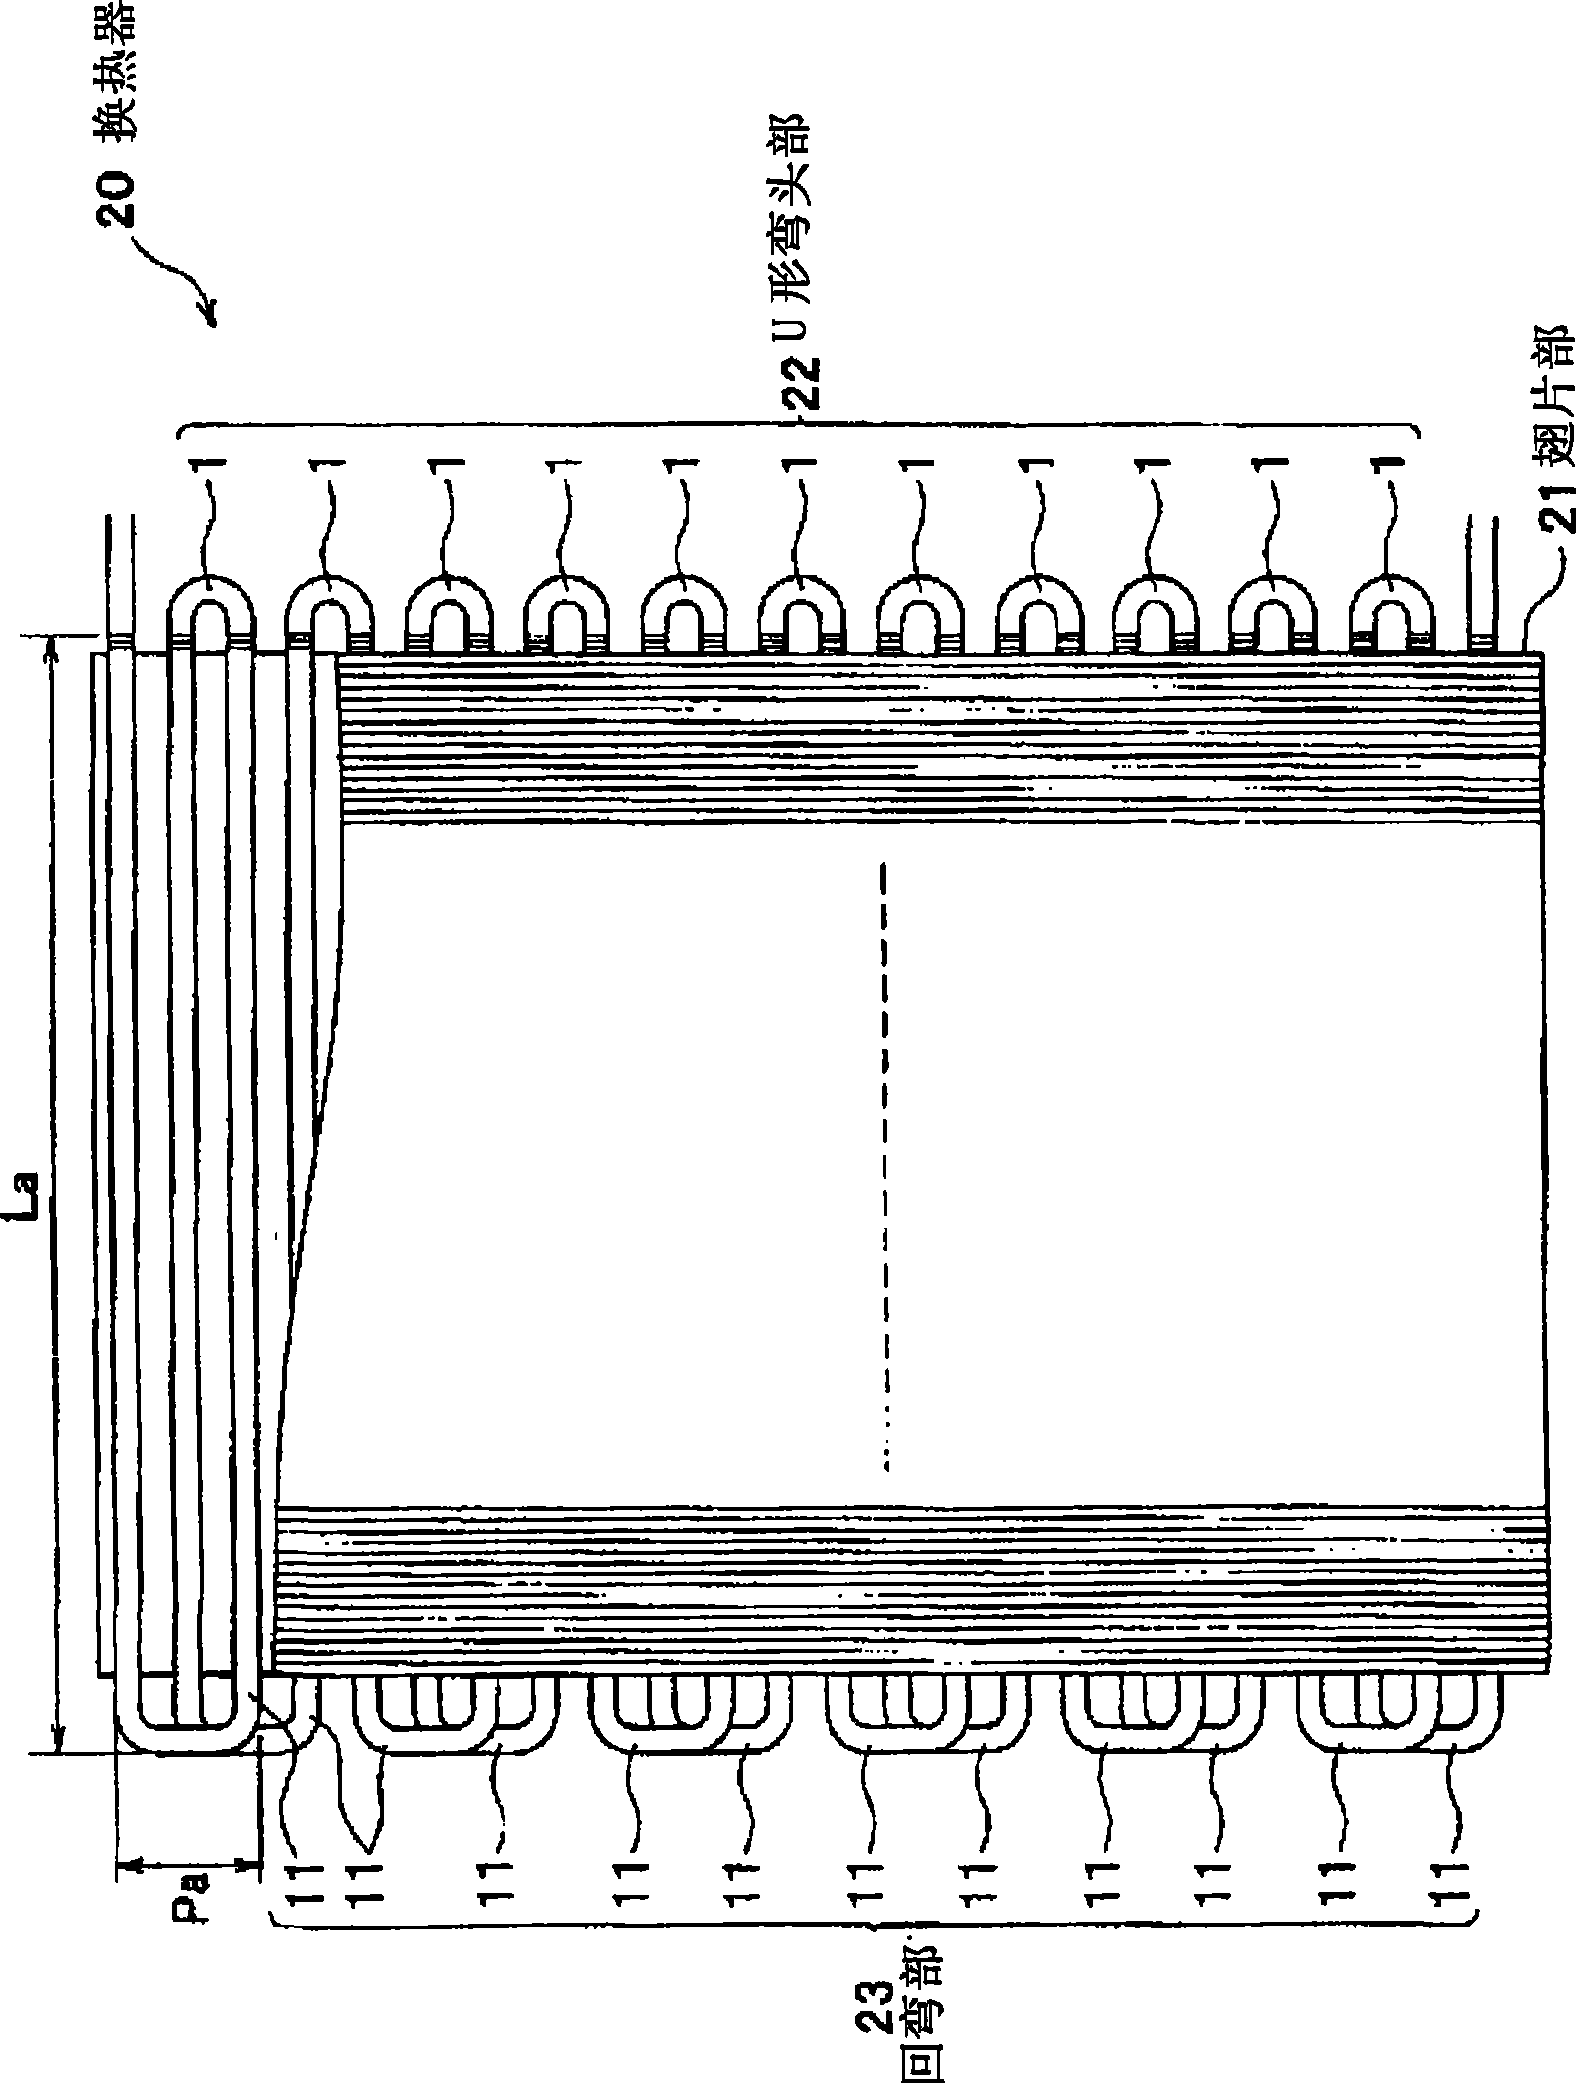 Fin-and-tube type heat exchanger, and its return bend pipe